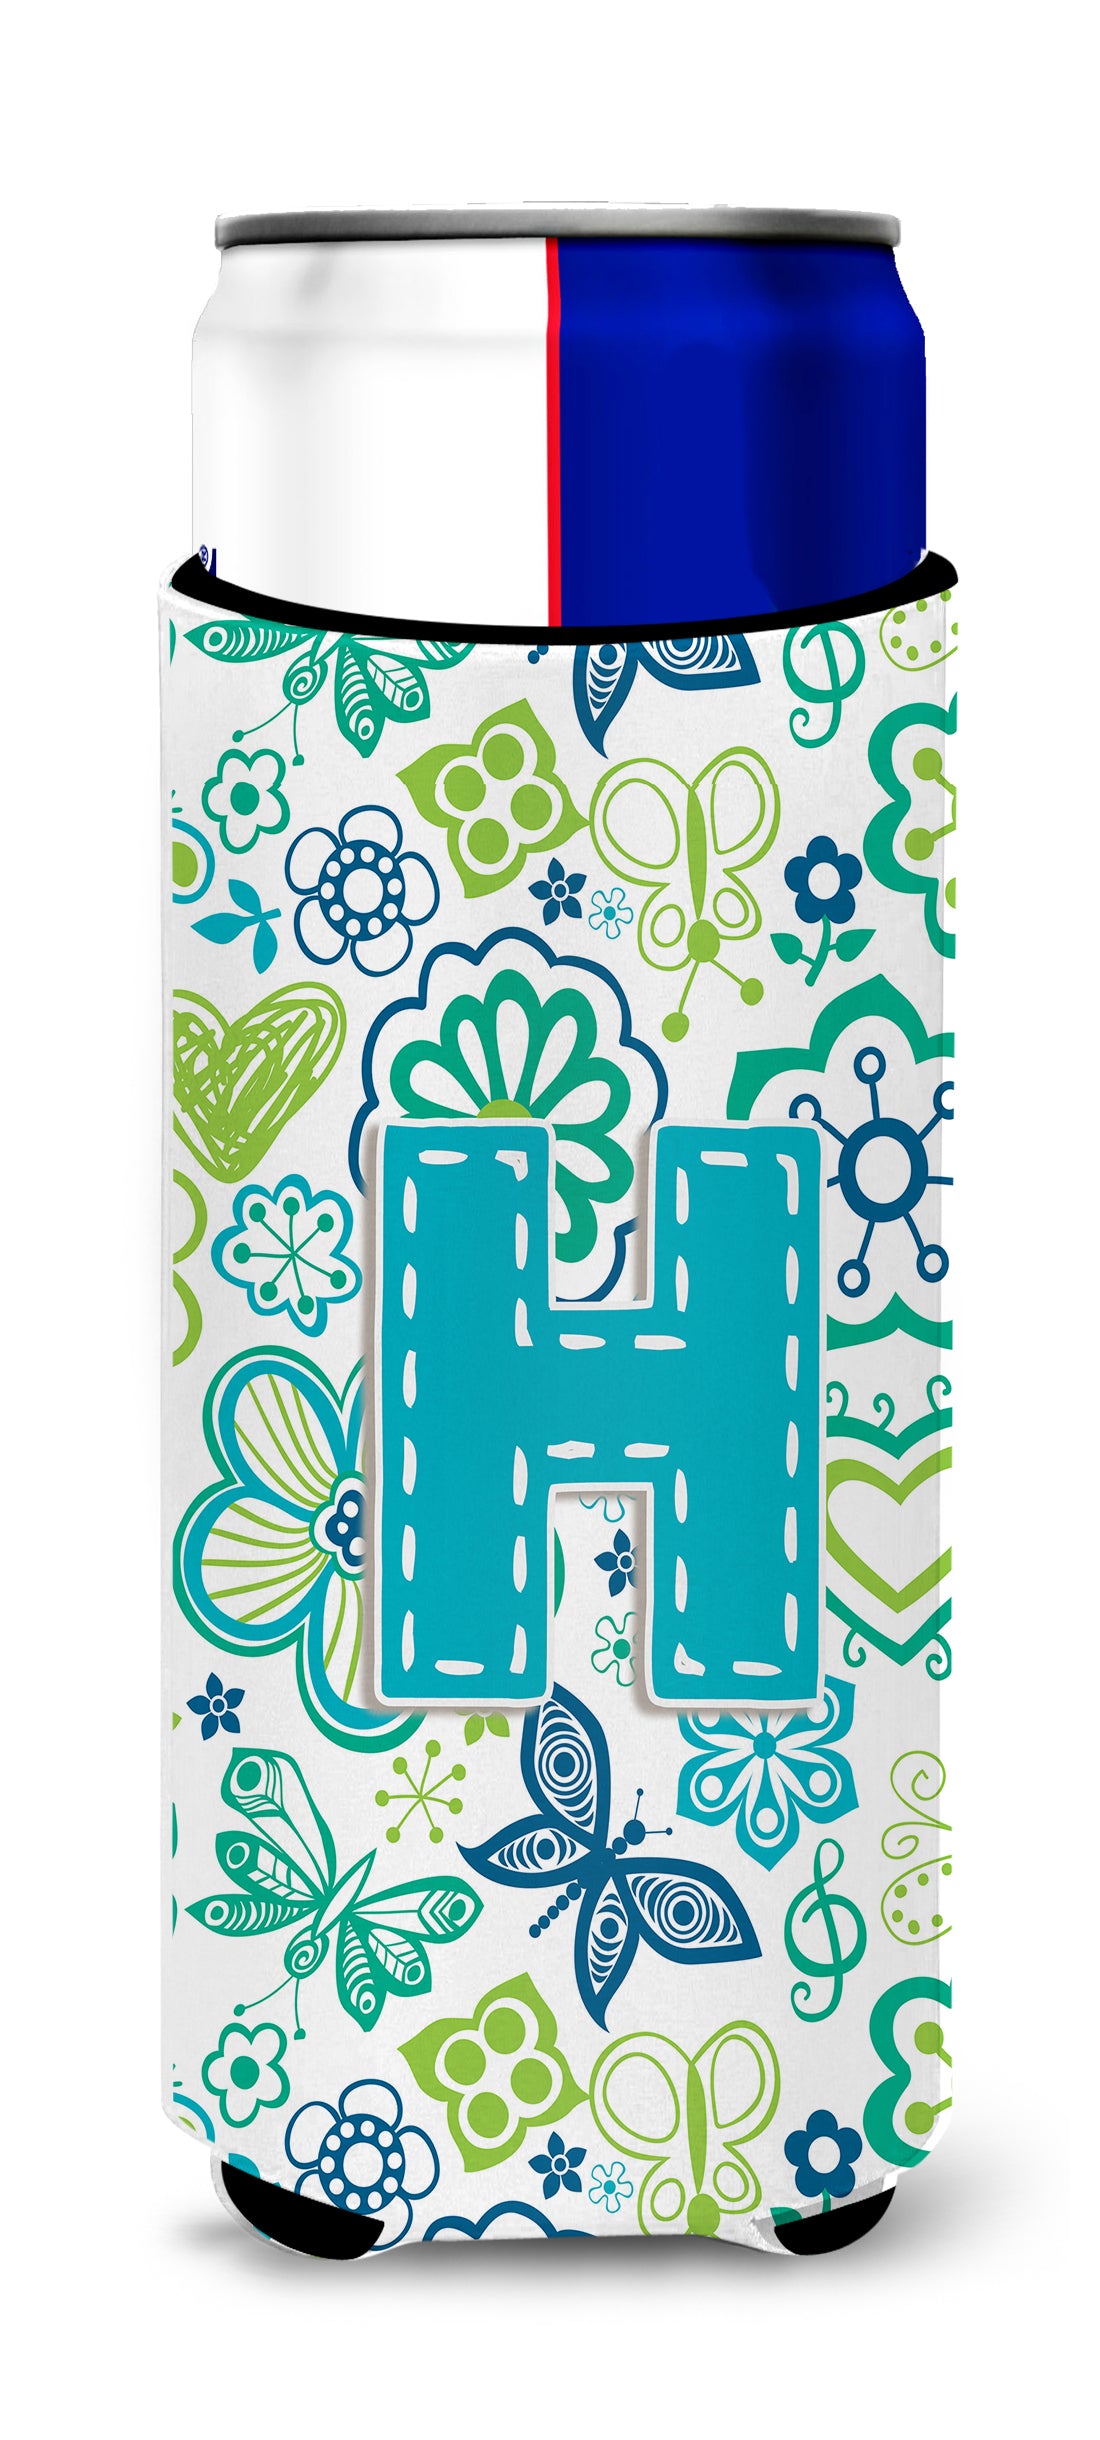 Letter H Flowers and Butterflies Teal Blue Ultra Beverage Insulators for slim cans CJ2006-HMUK.